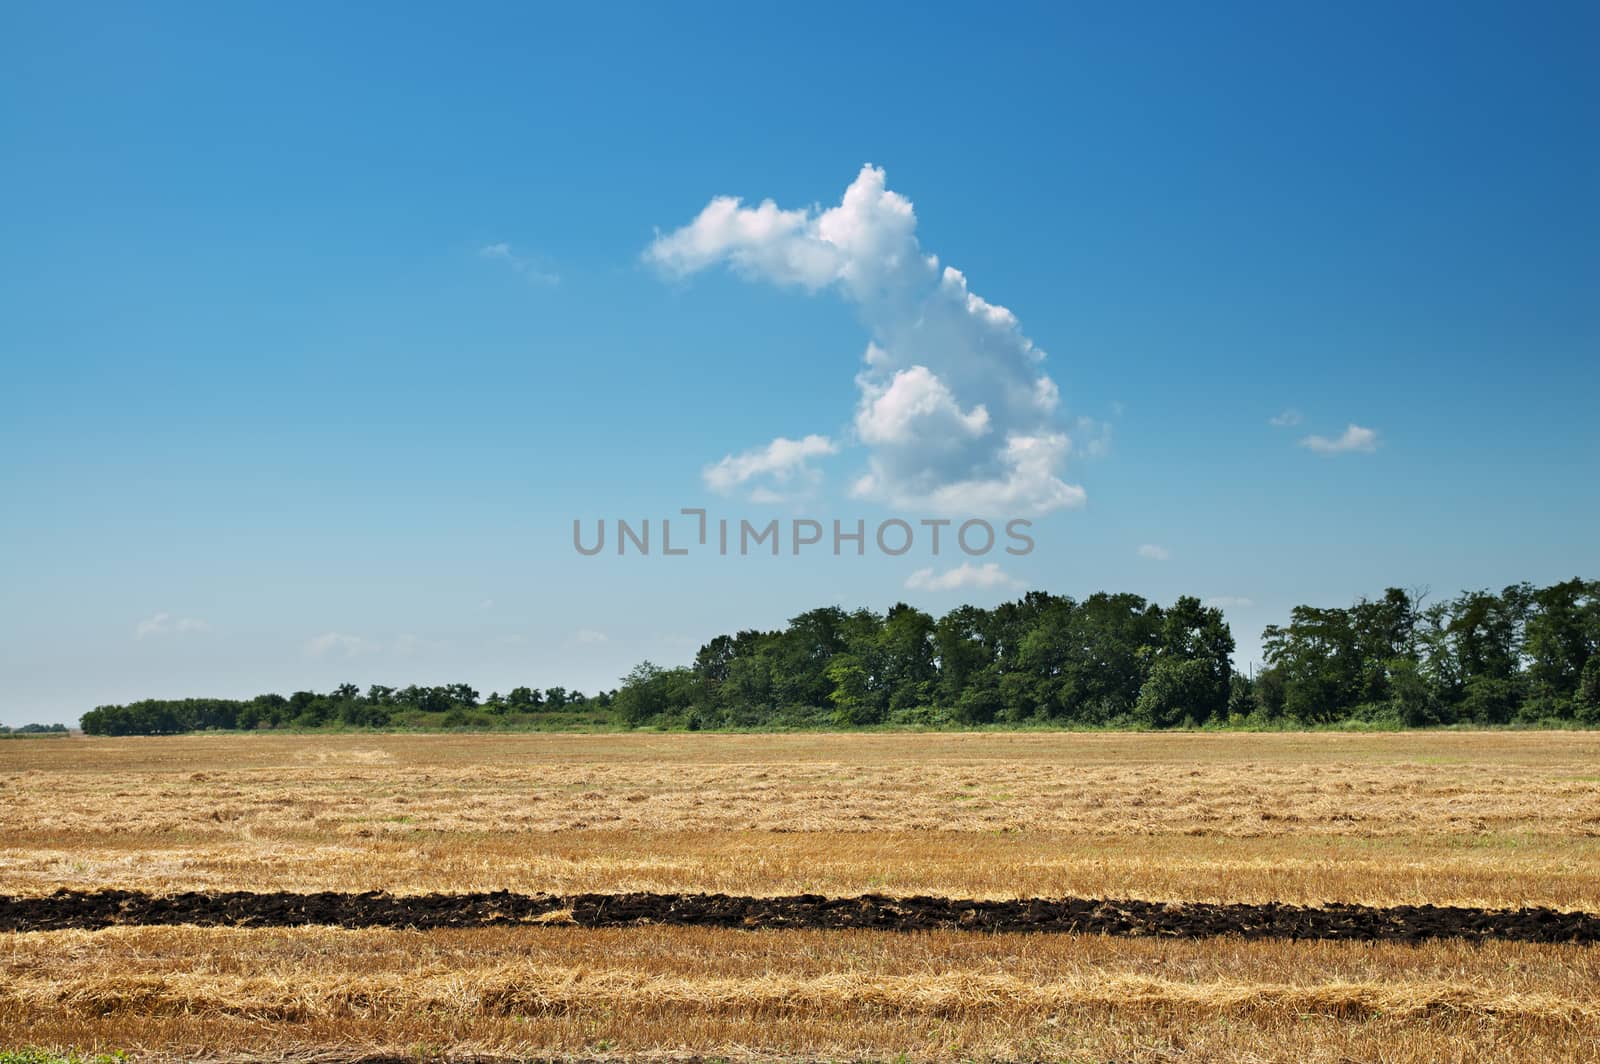 windrows on field after harvesting